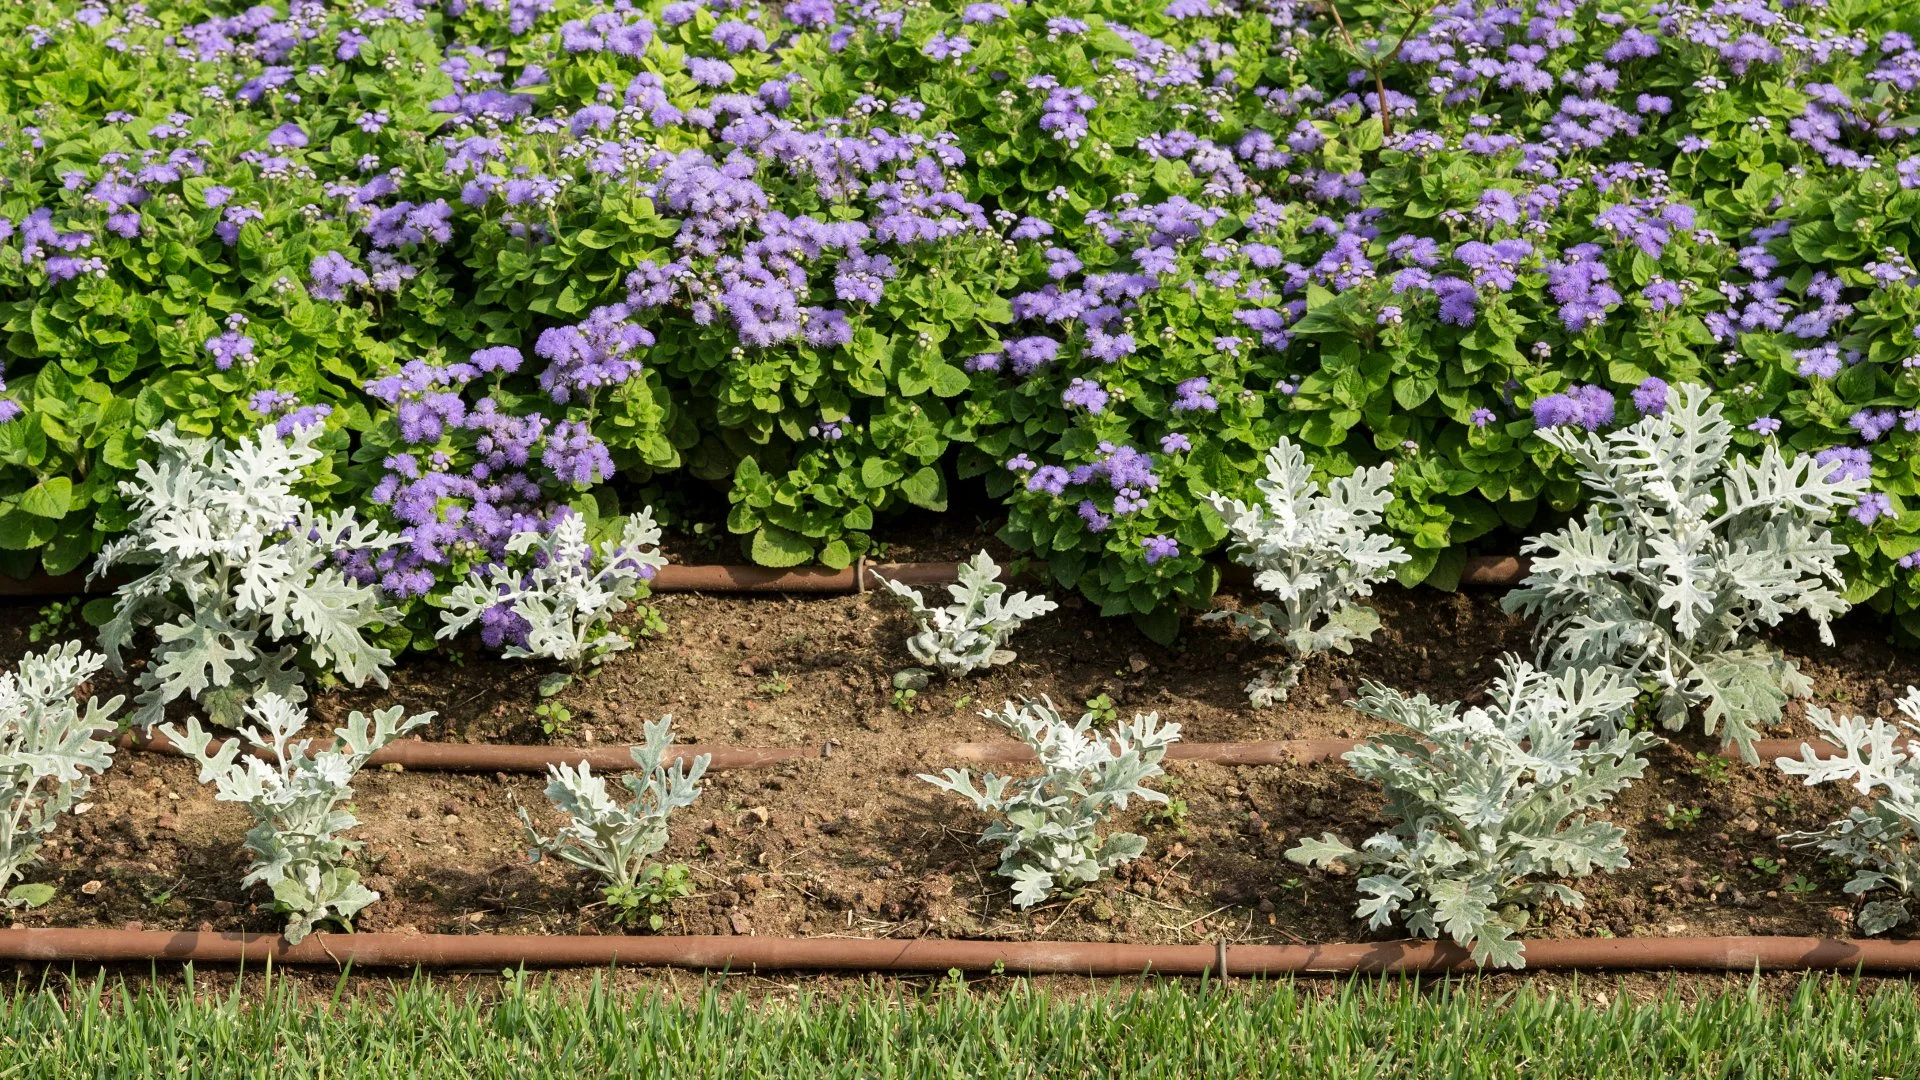 Drip vs Sprinkler Irrigation - Which Is Better for Your Landscape Beds?